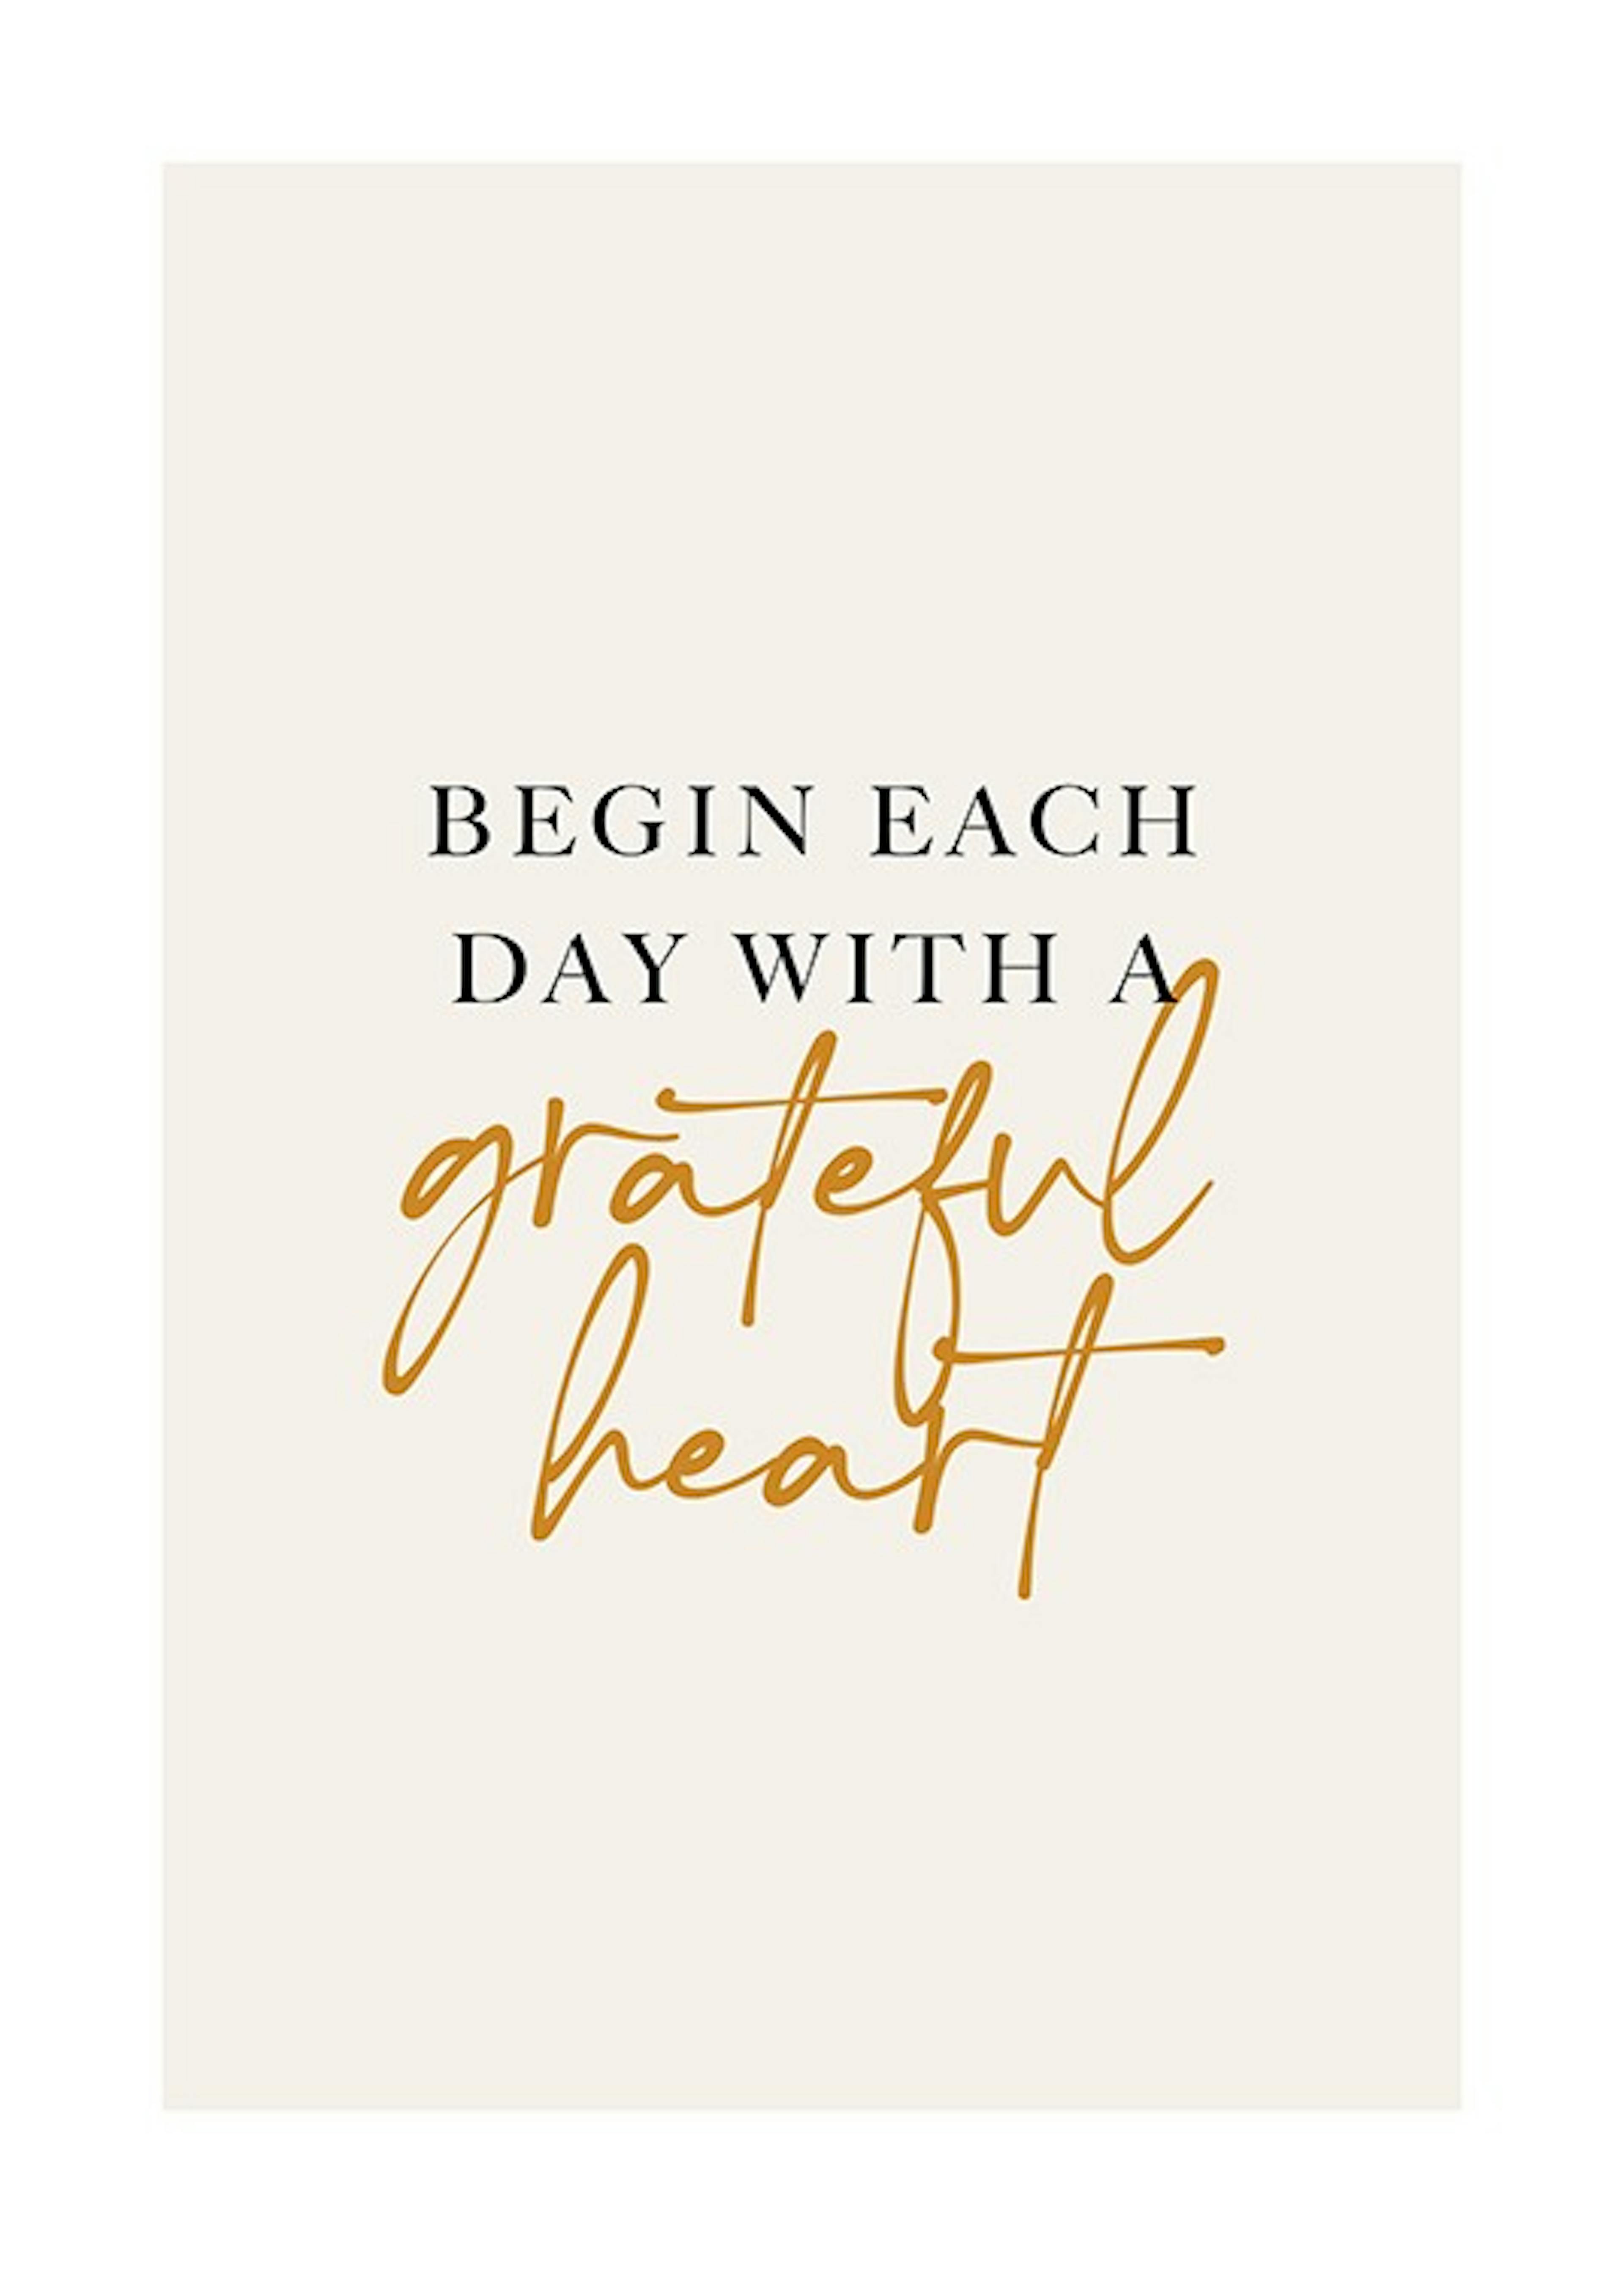 With a Grateful Heart Poster